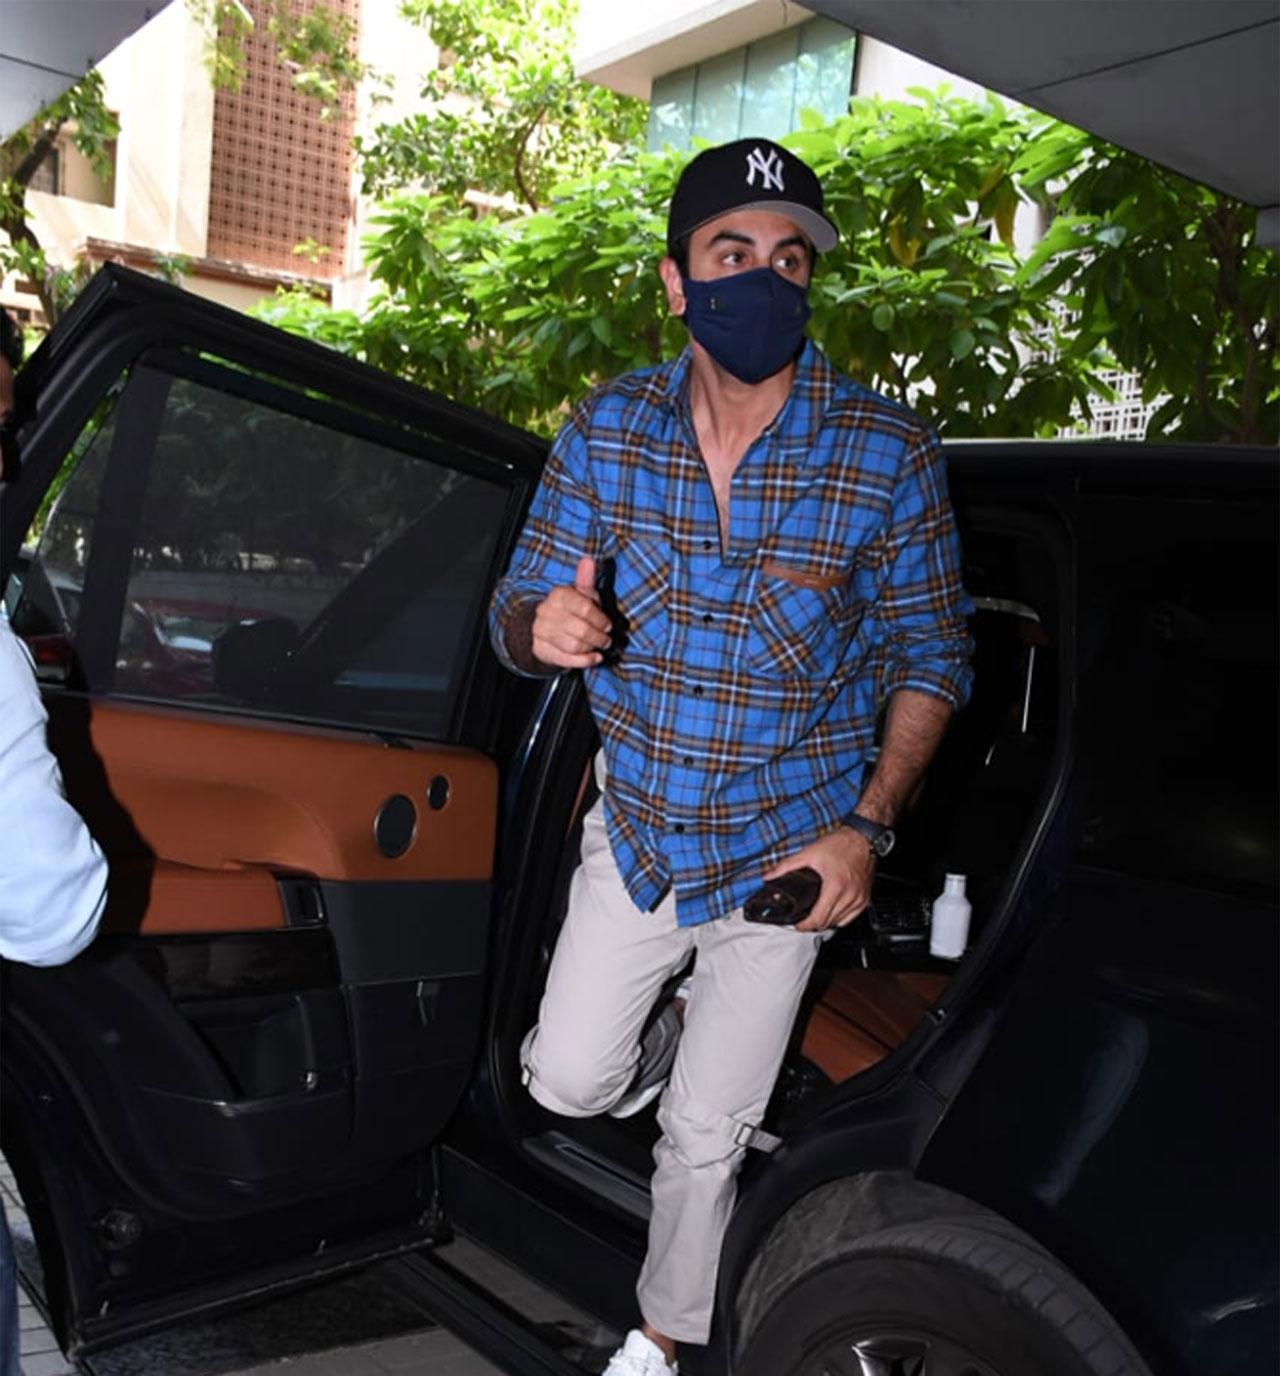 Ranbir spotted at T-Series` office, media congratulate him for